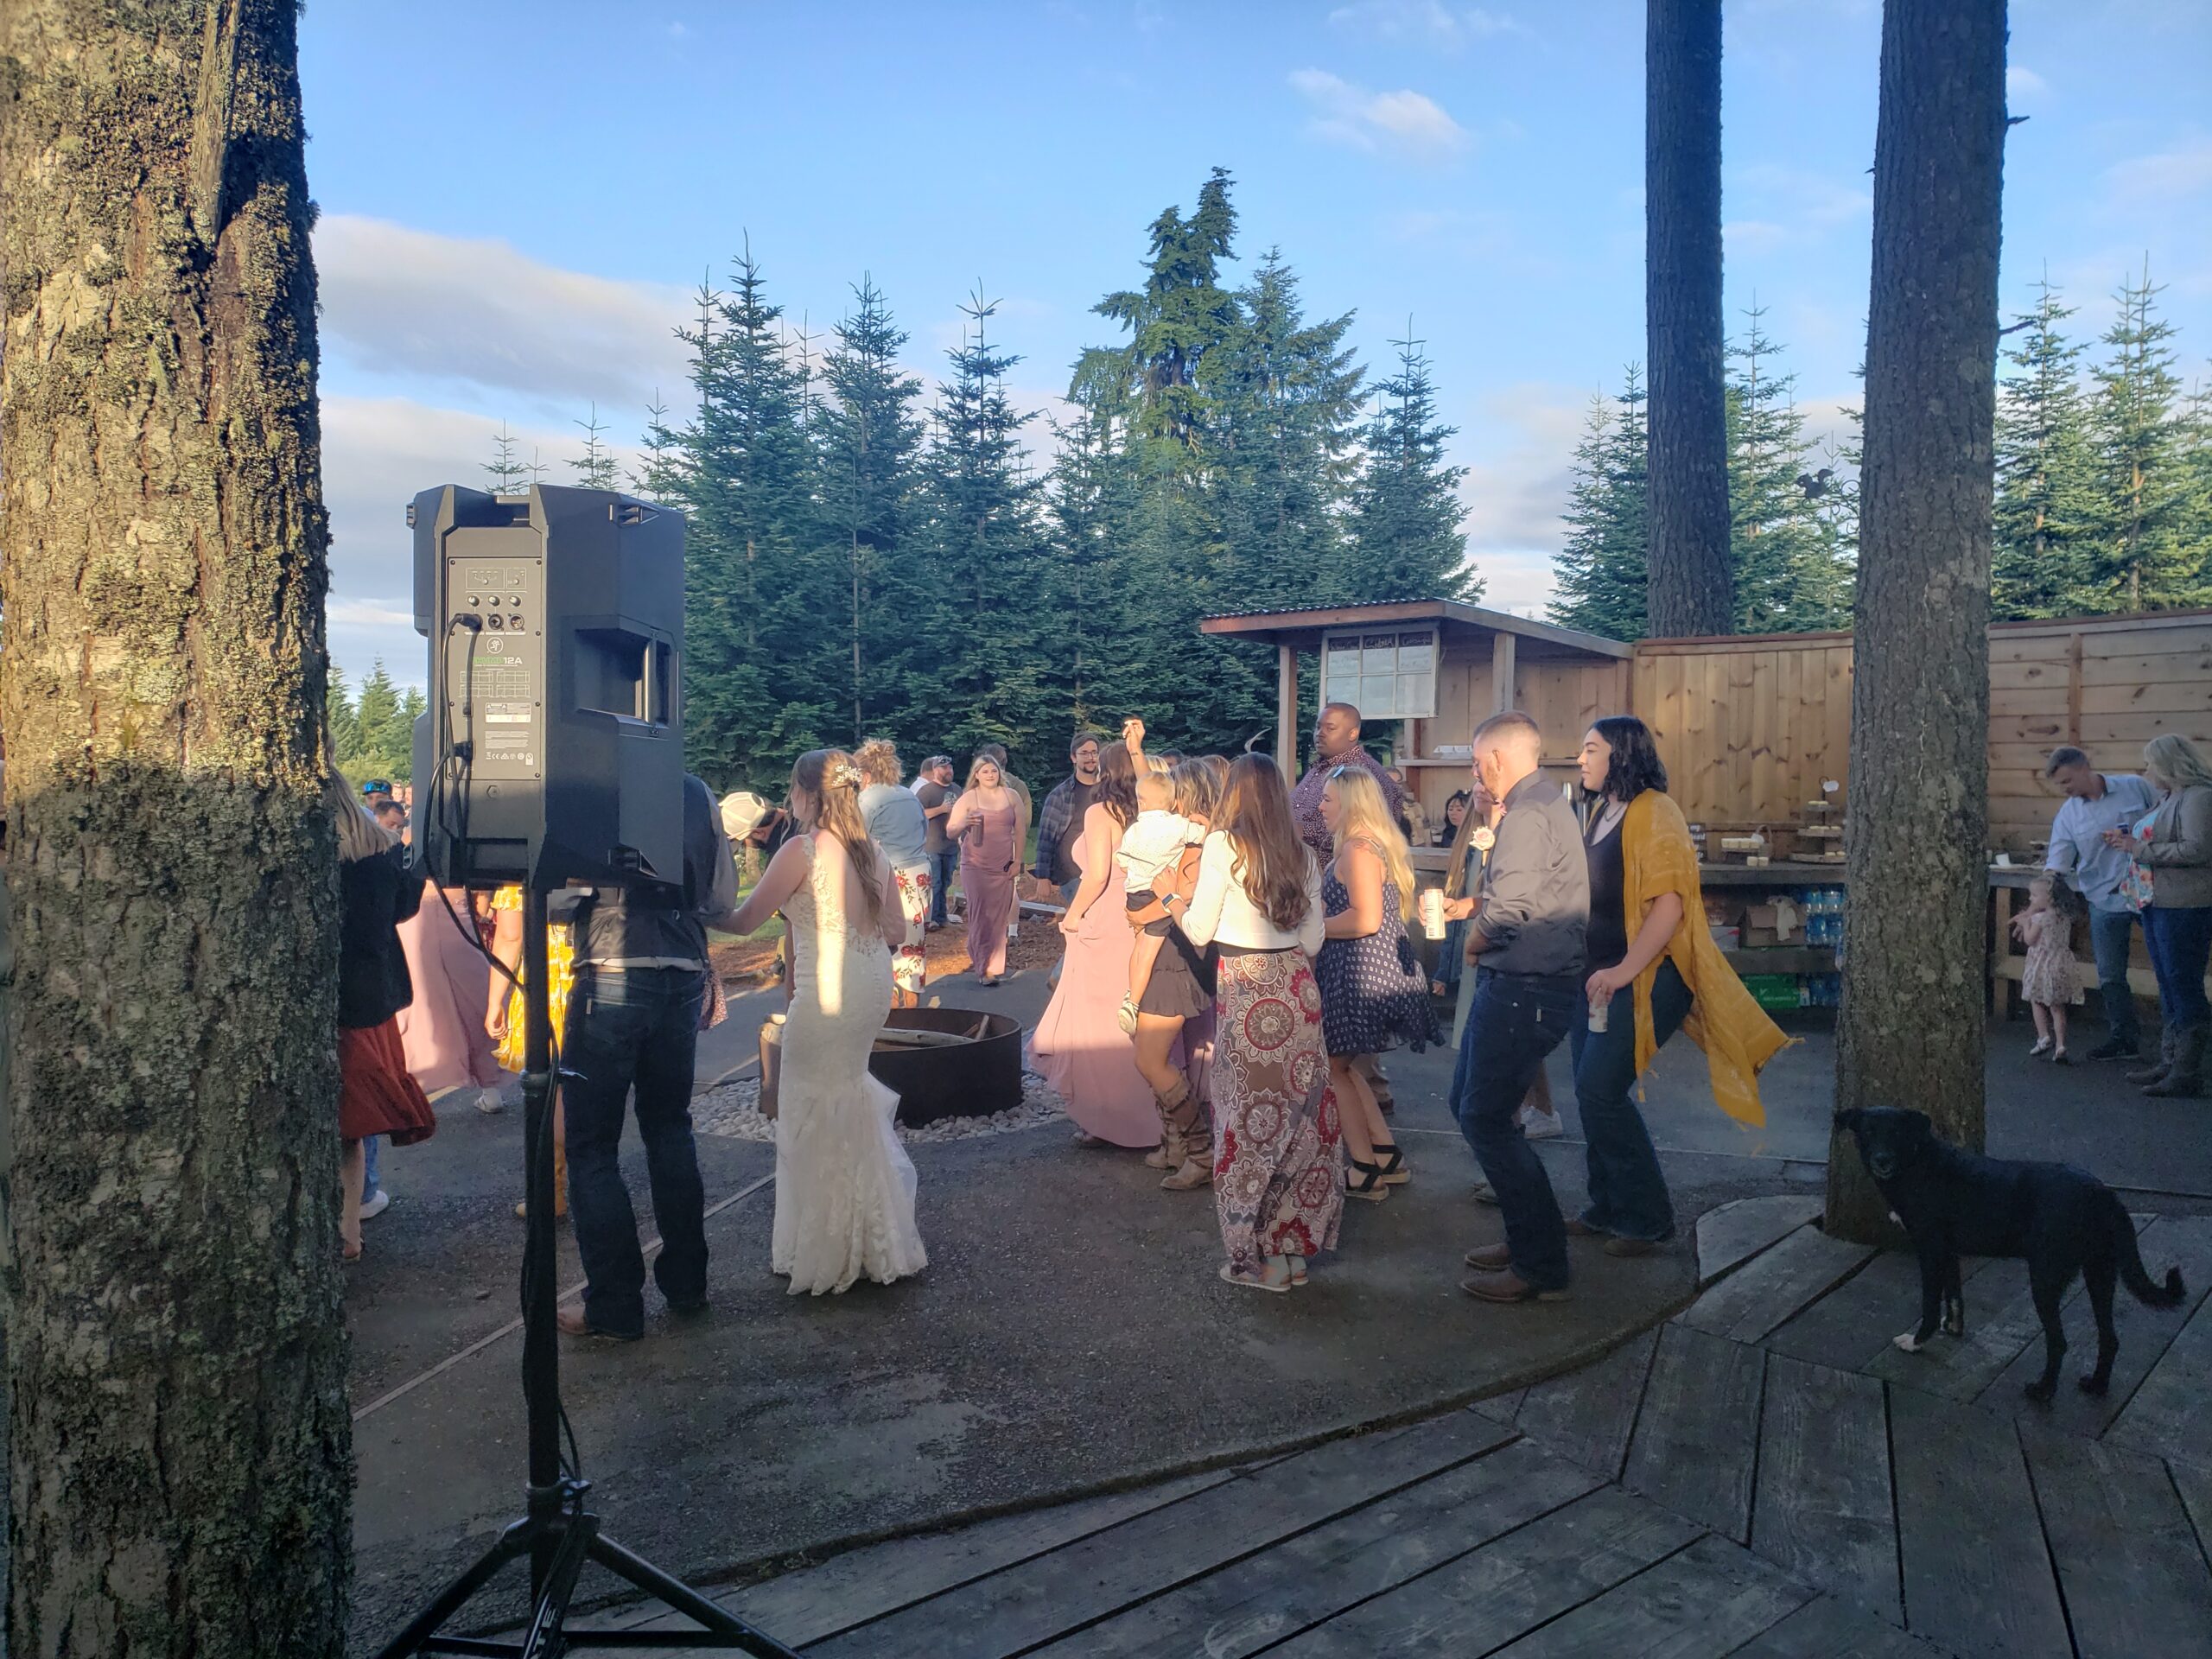 Wedding And Reception In St. Helens Oregon (7-16-2022)